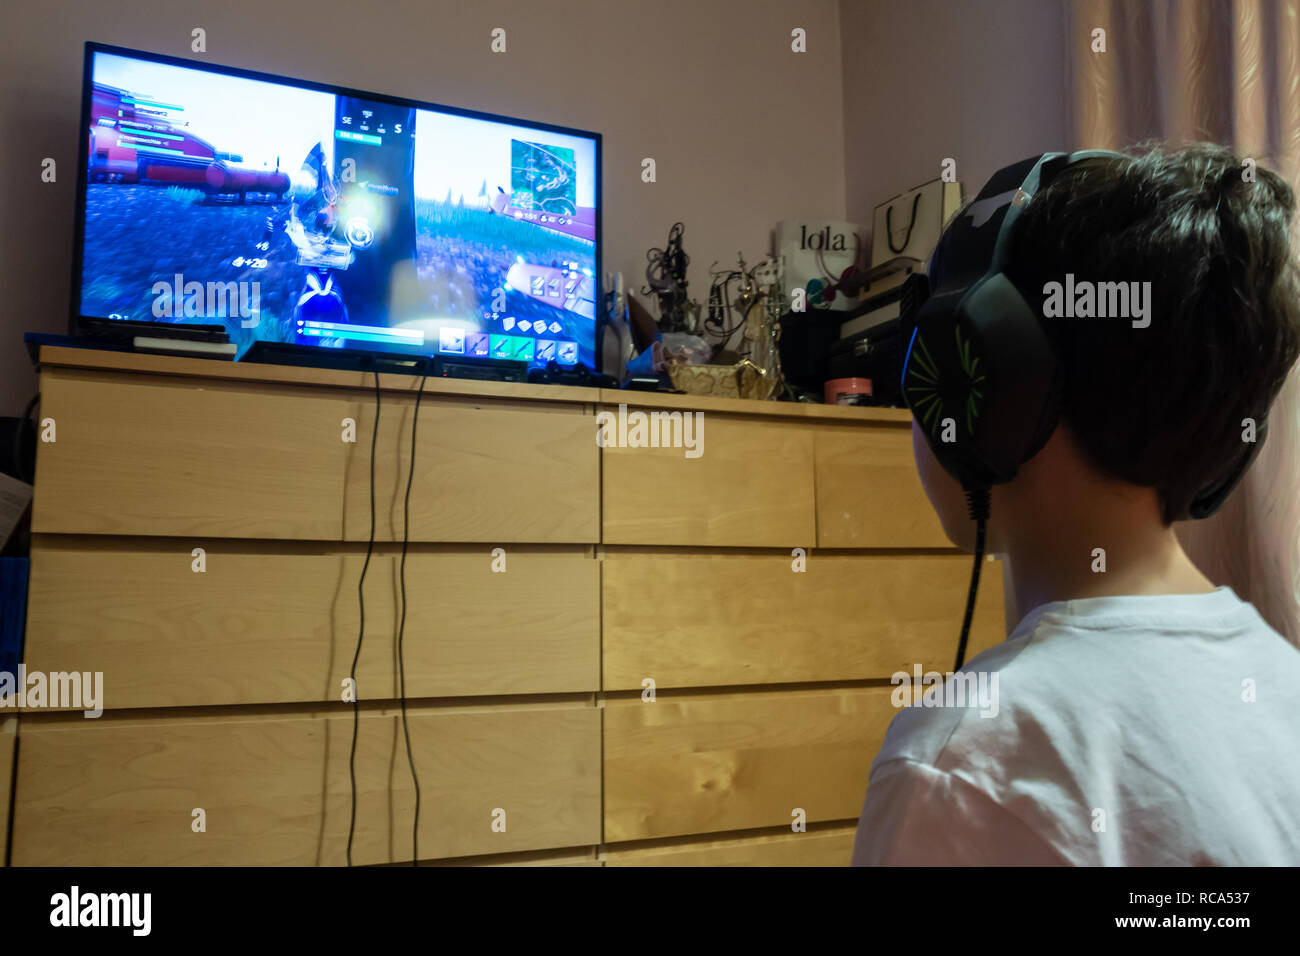 A young boy plays the computer game Fortnite on a games console in a bedroom Stock Photo